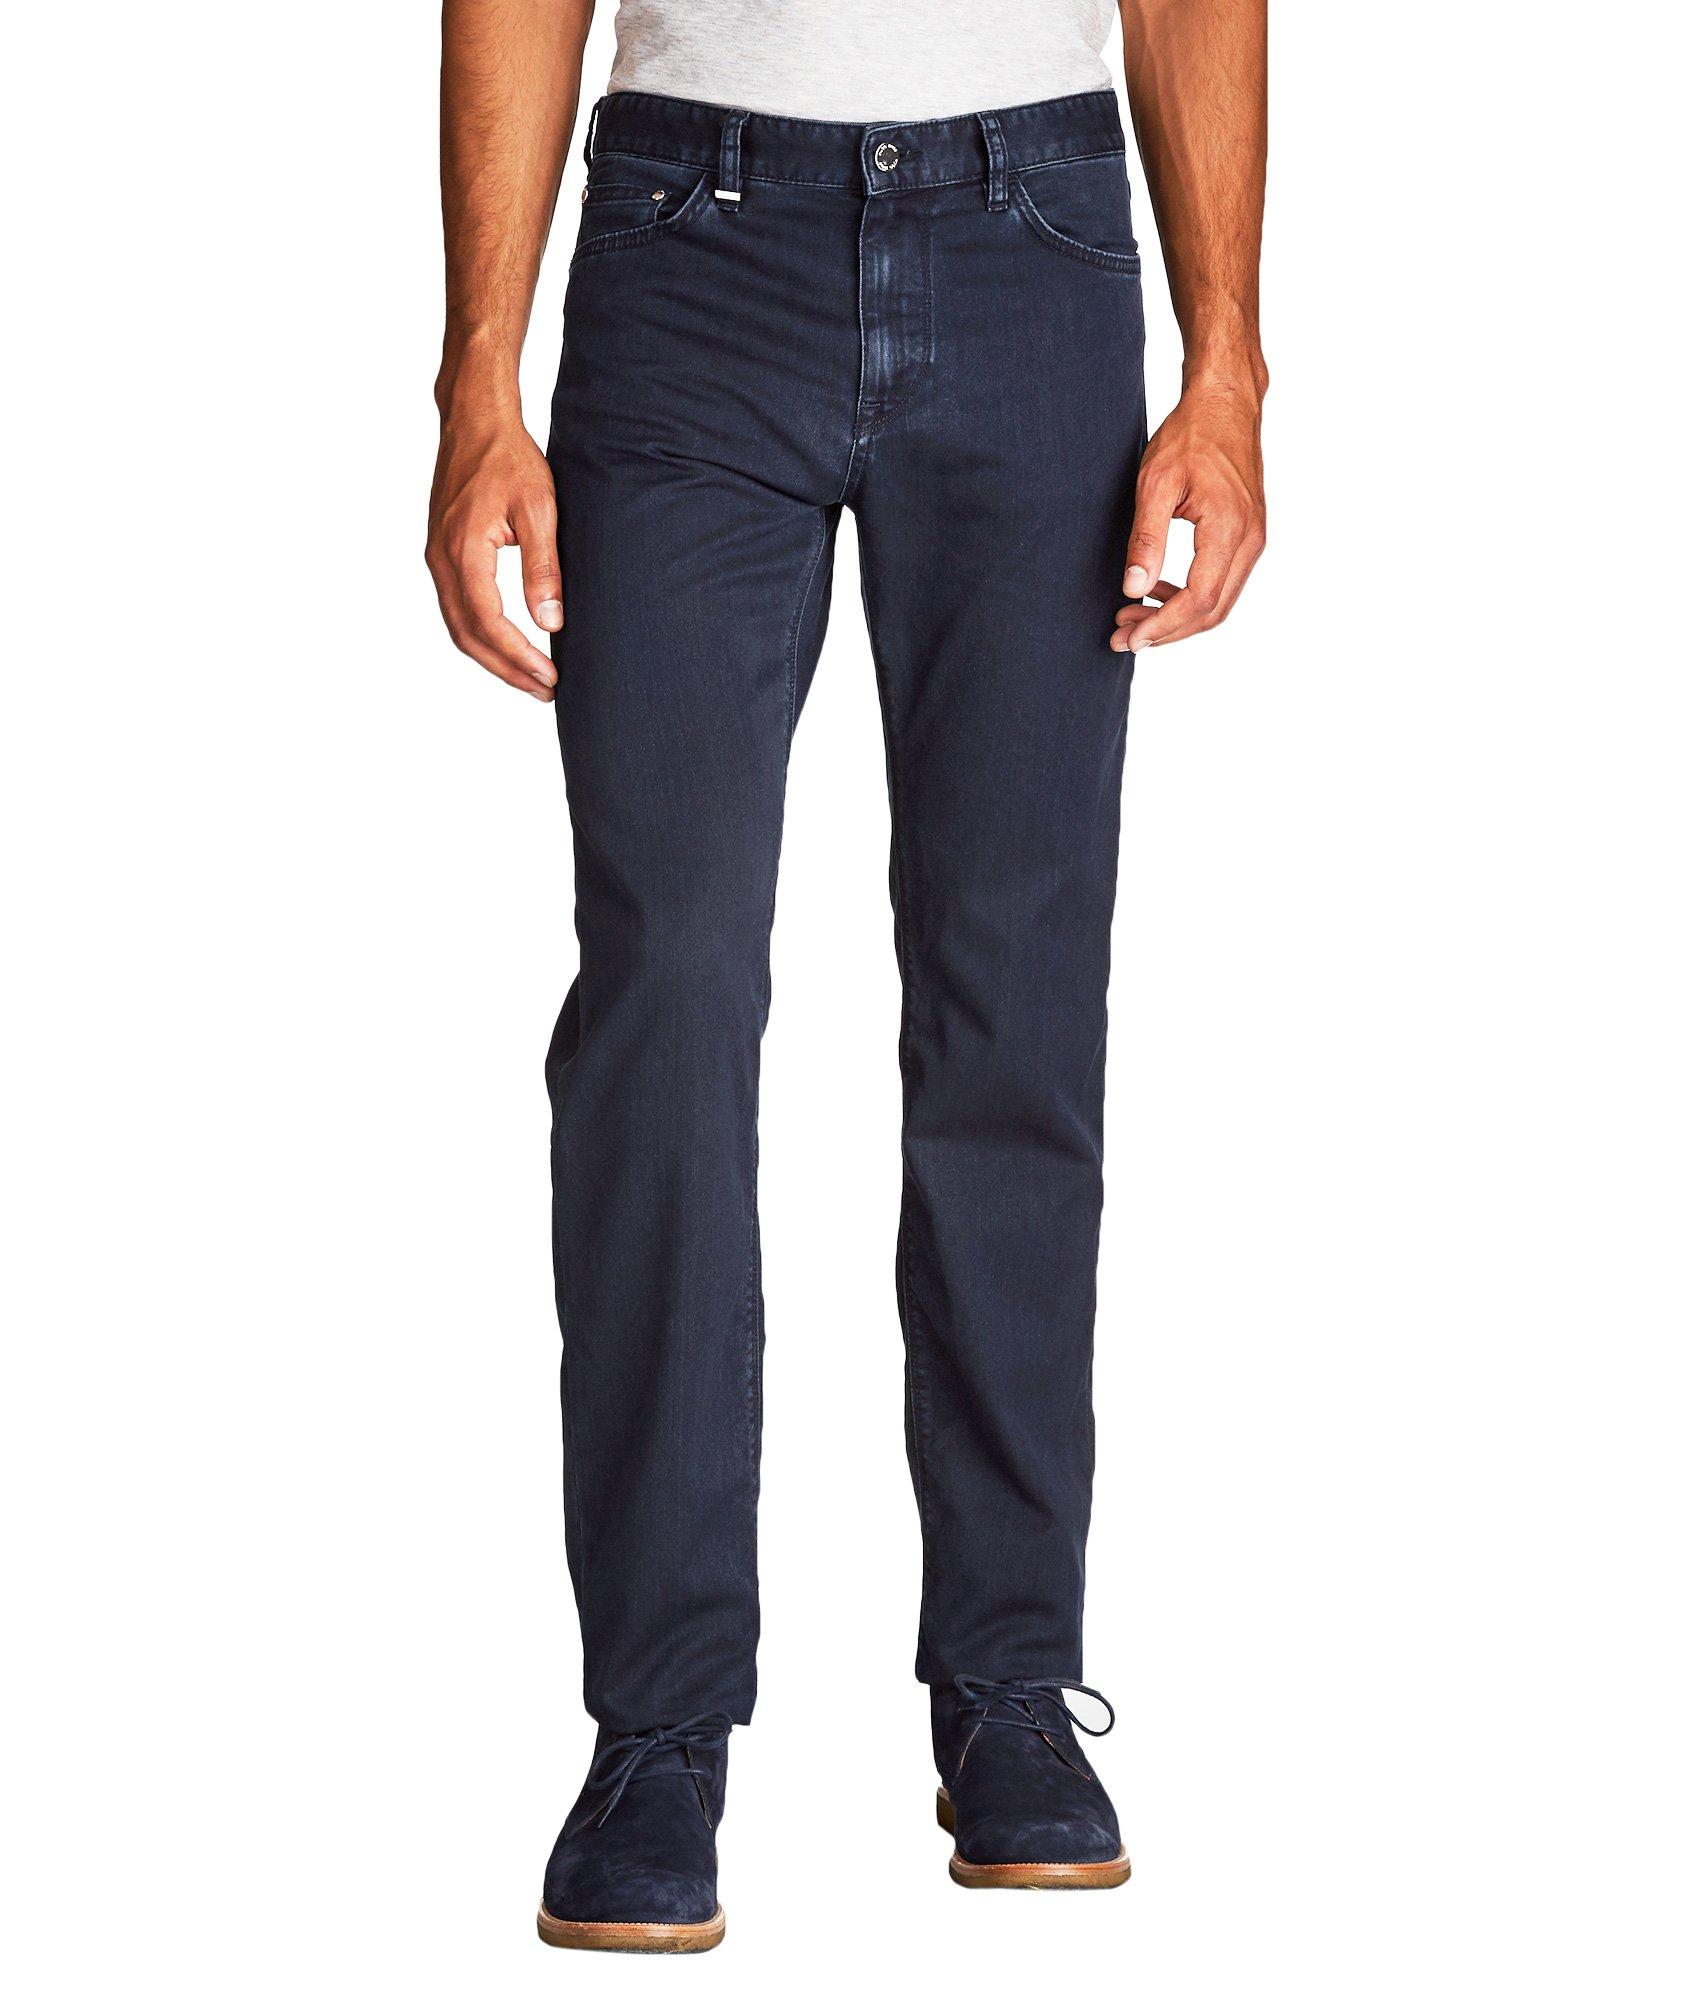 Maine Straight Fit Jeans image 0